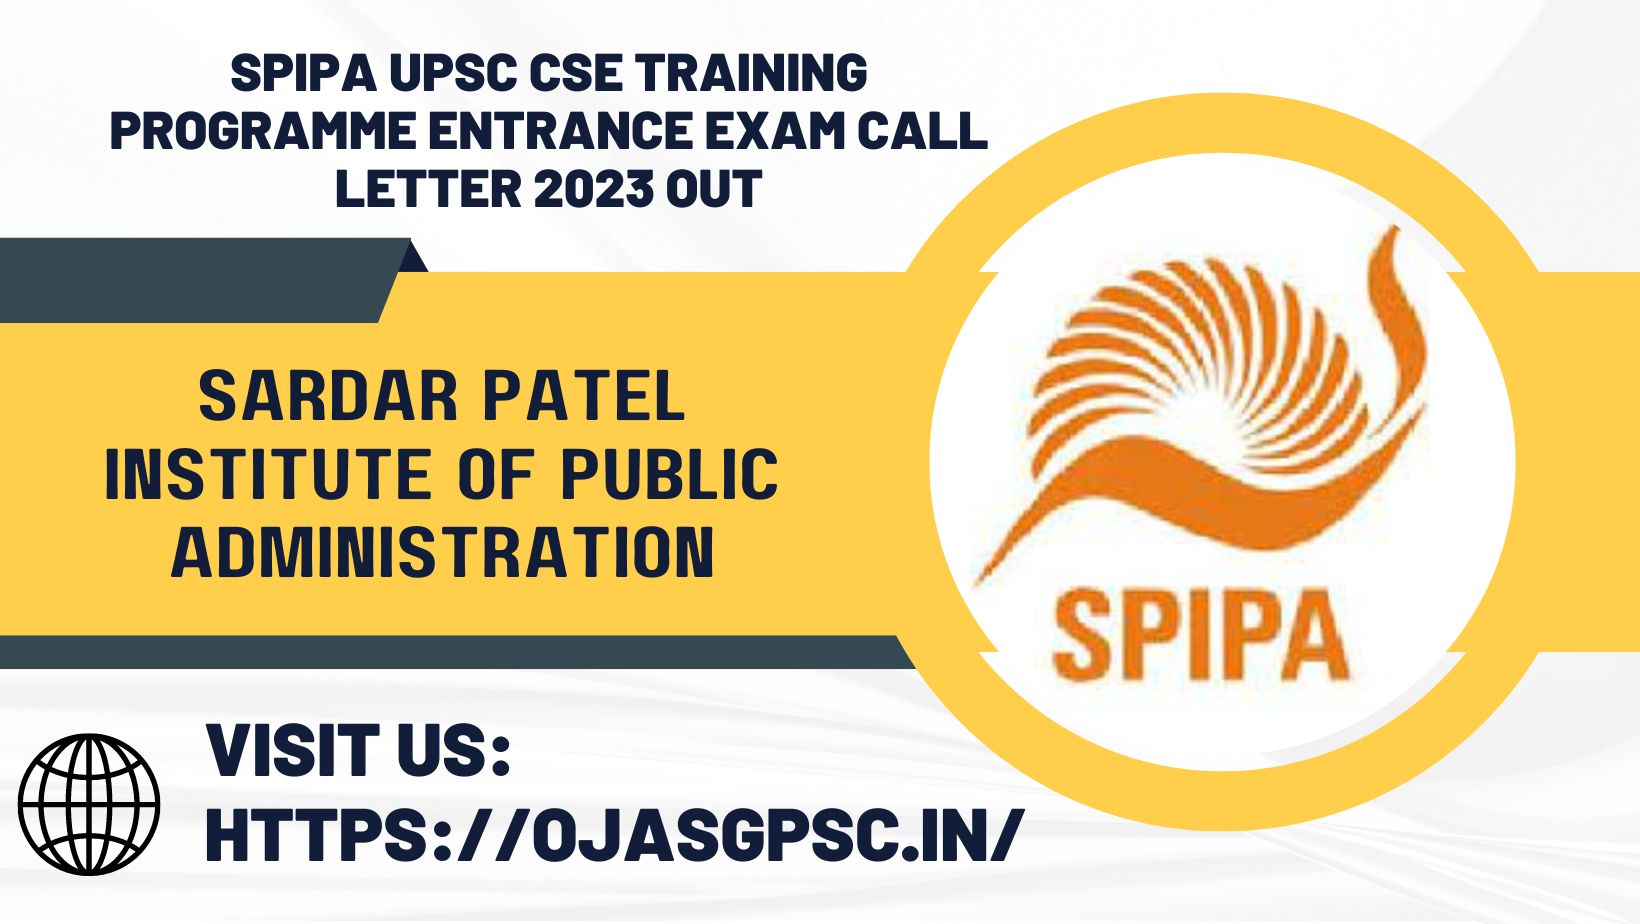 Sardar Patel Institute of Public Administration (SPIPA) UPSC CSE Training Programme Entrance Exam Call Letter 2023 Out